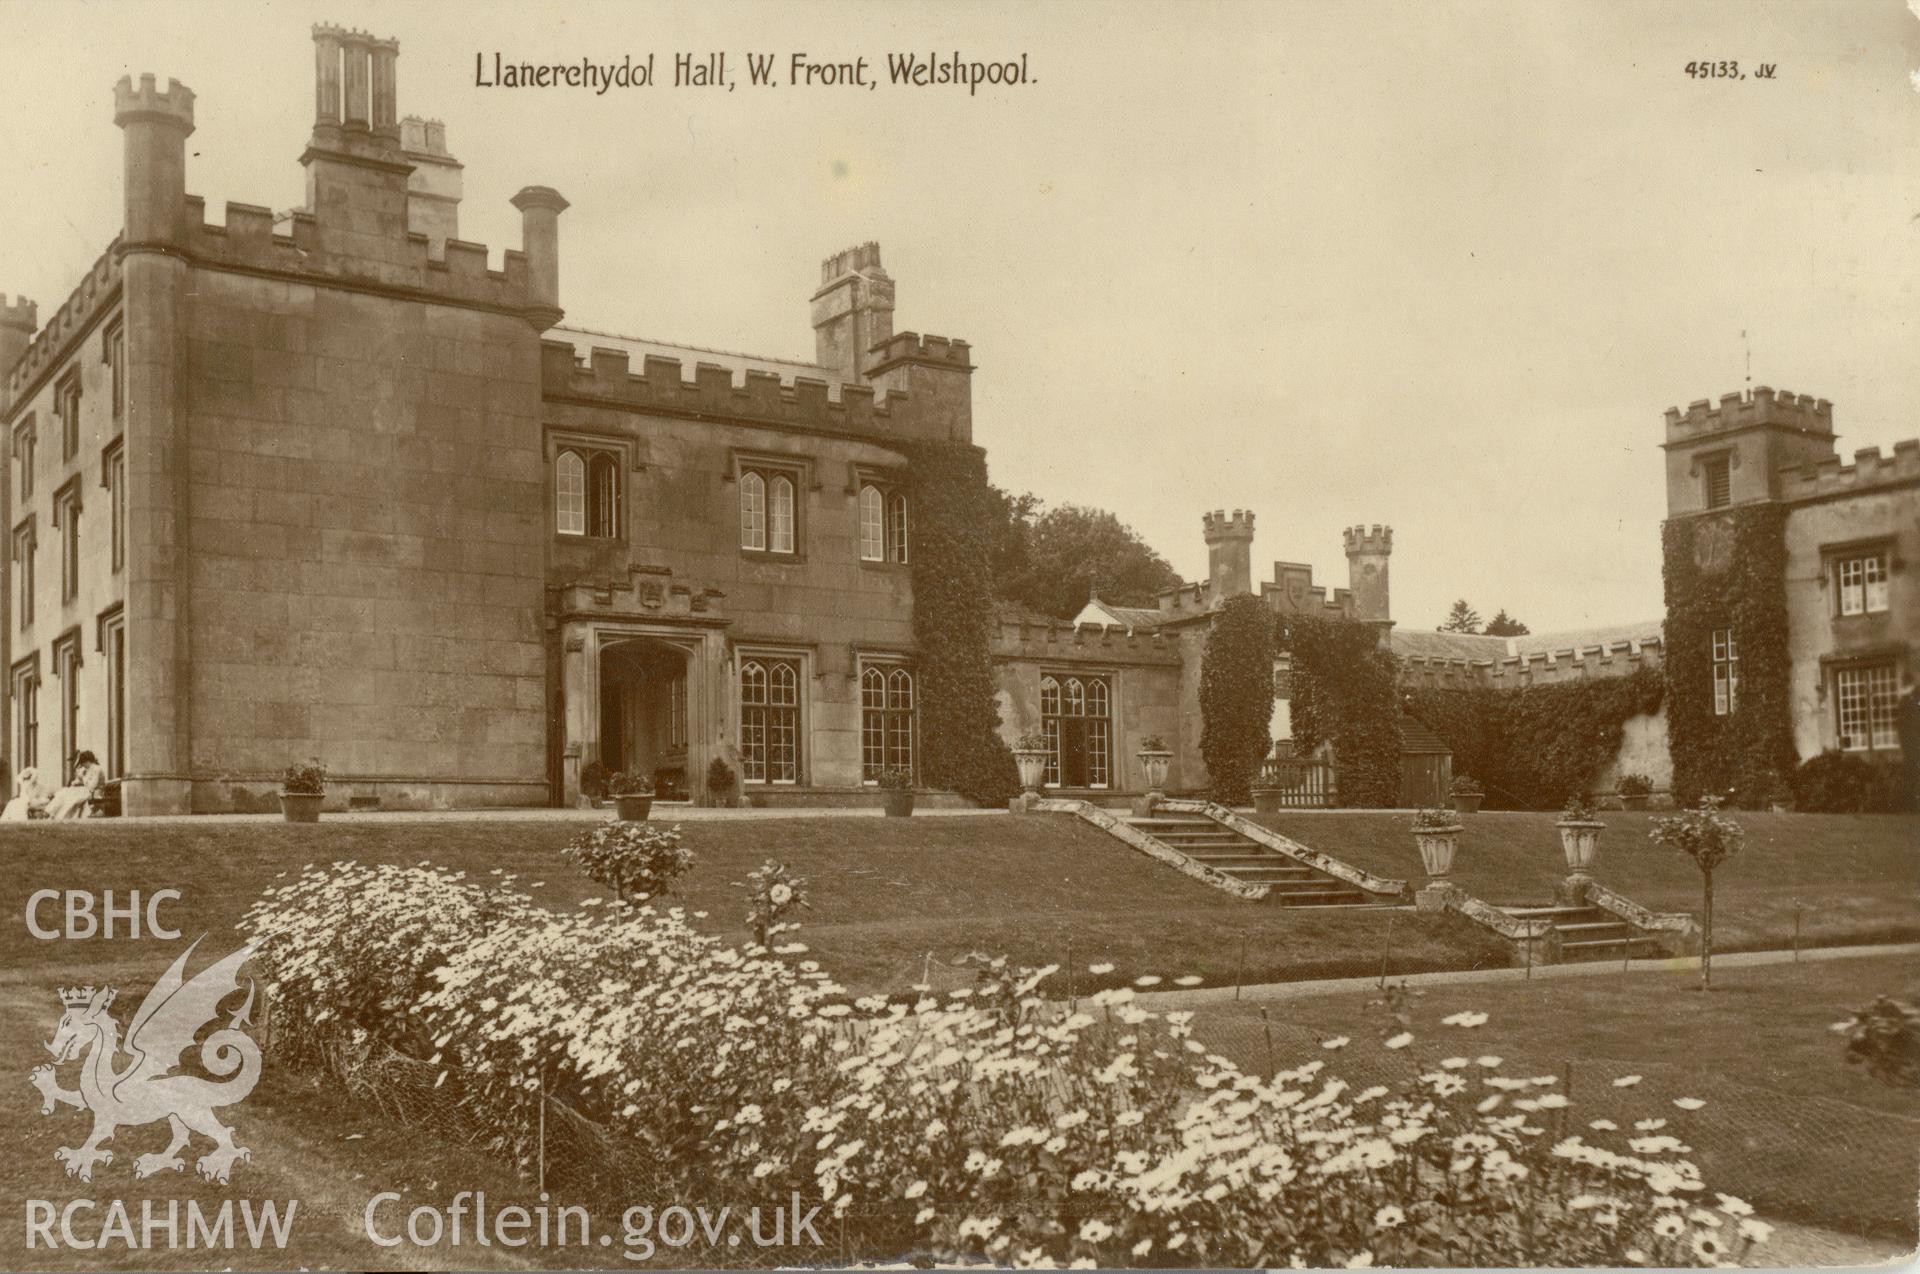 Digitised postcard image of Llanerchydol Hall, Welshpool, Valentines Series. Produced by Parks and Gardens Data Services, from an original item in the Peter Davis Collection at Parks and Gardens UK. We hold only web-resolution images of this collection, suitable for viewing on screen and for research purposes only. We do not hold the original images, or publication quality scans.